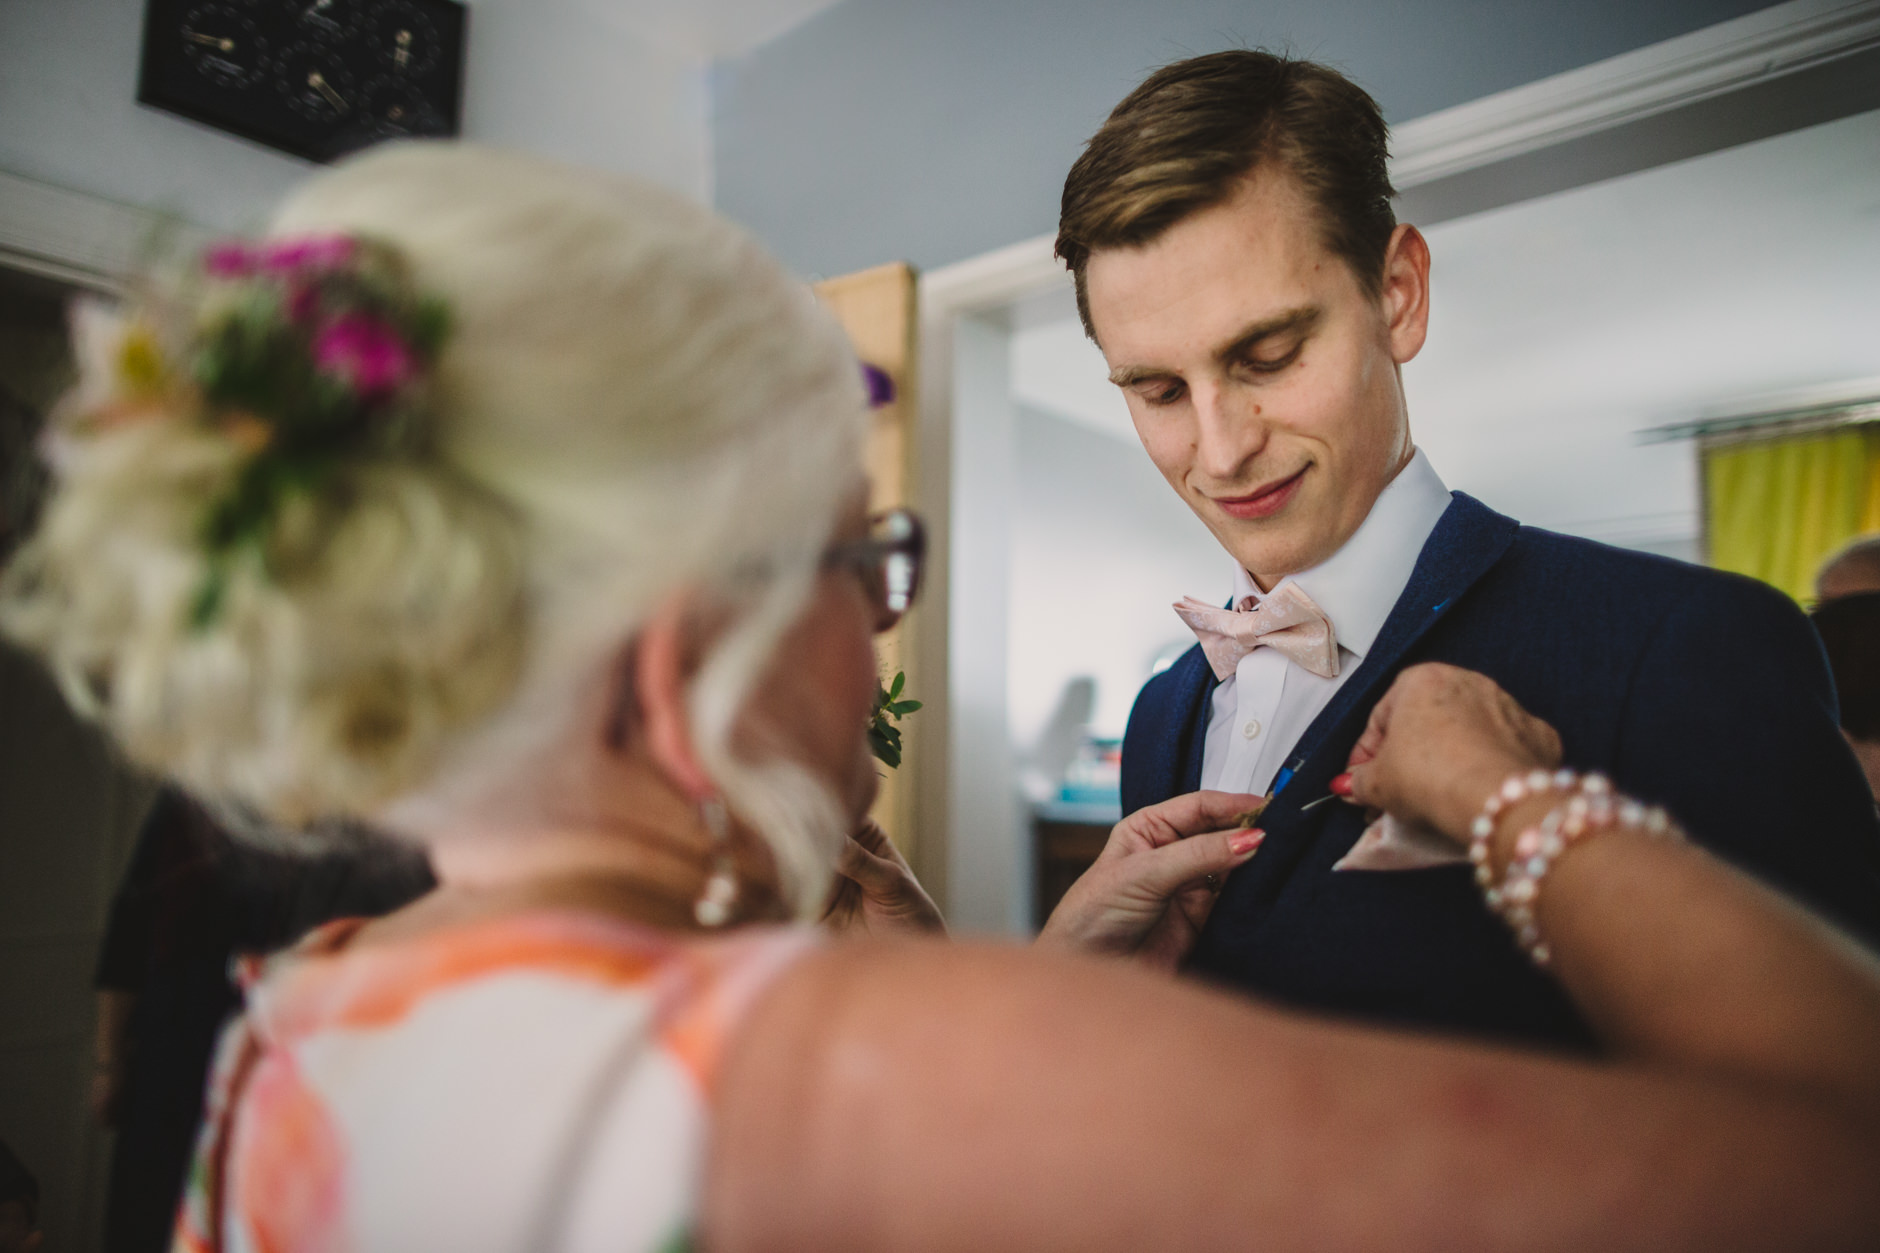 mother of the groom helps her son to get ready for his wedding day